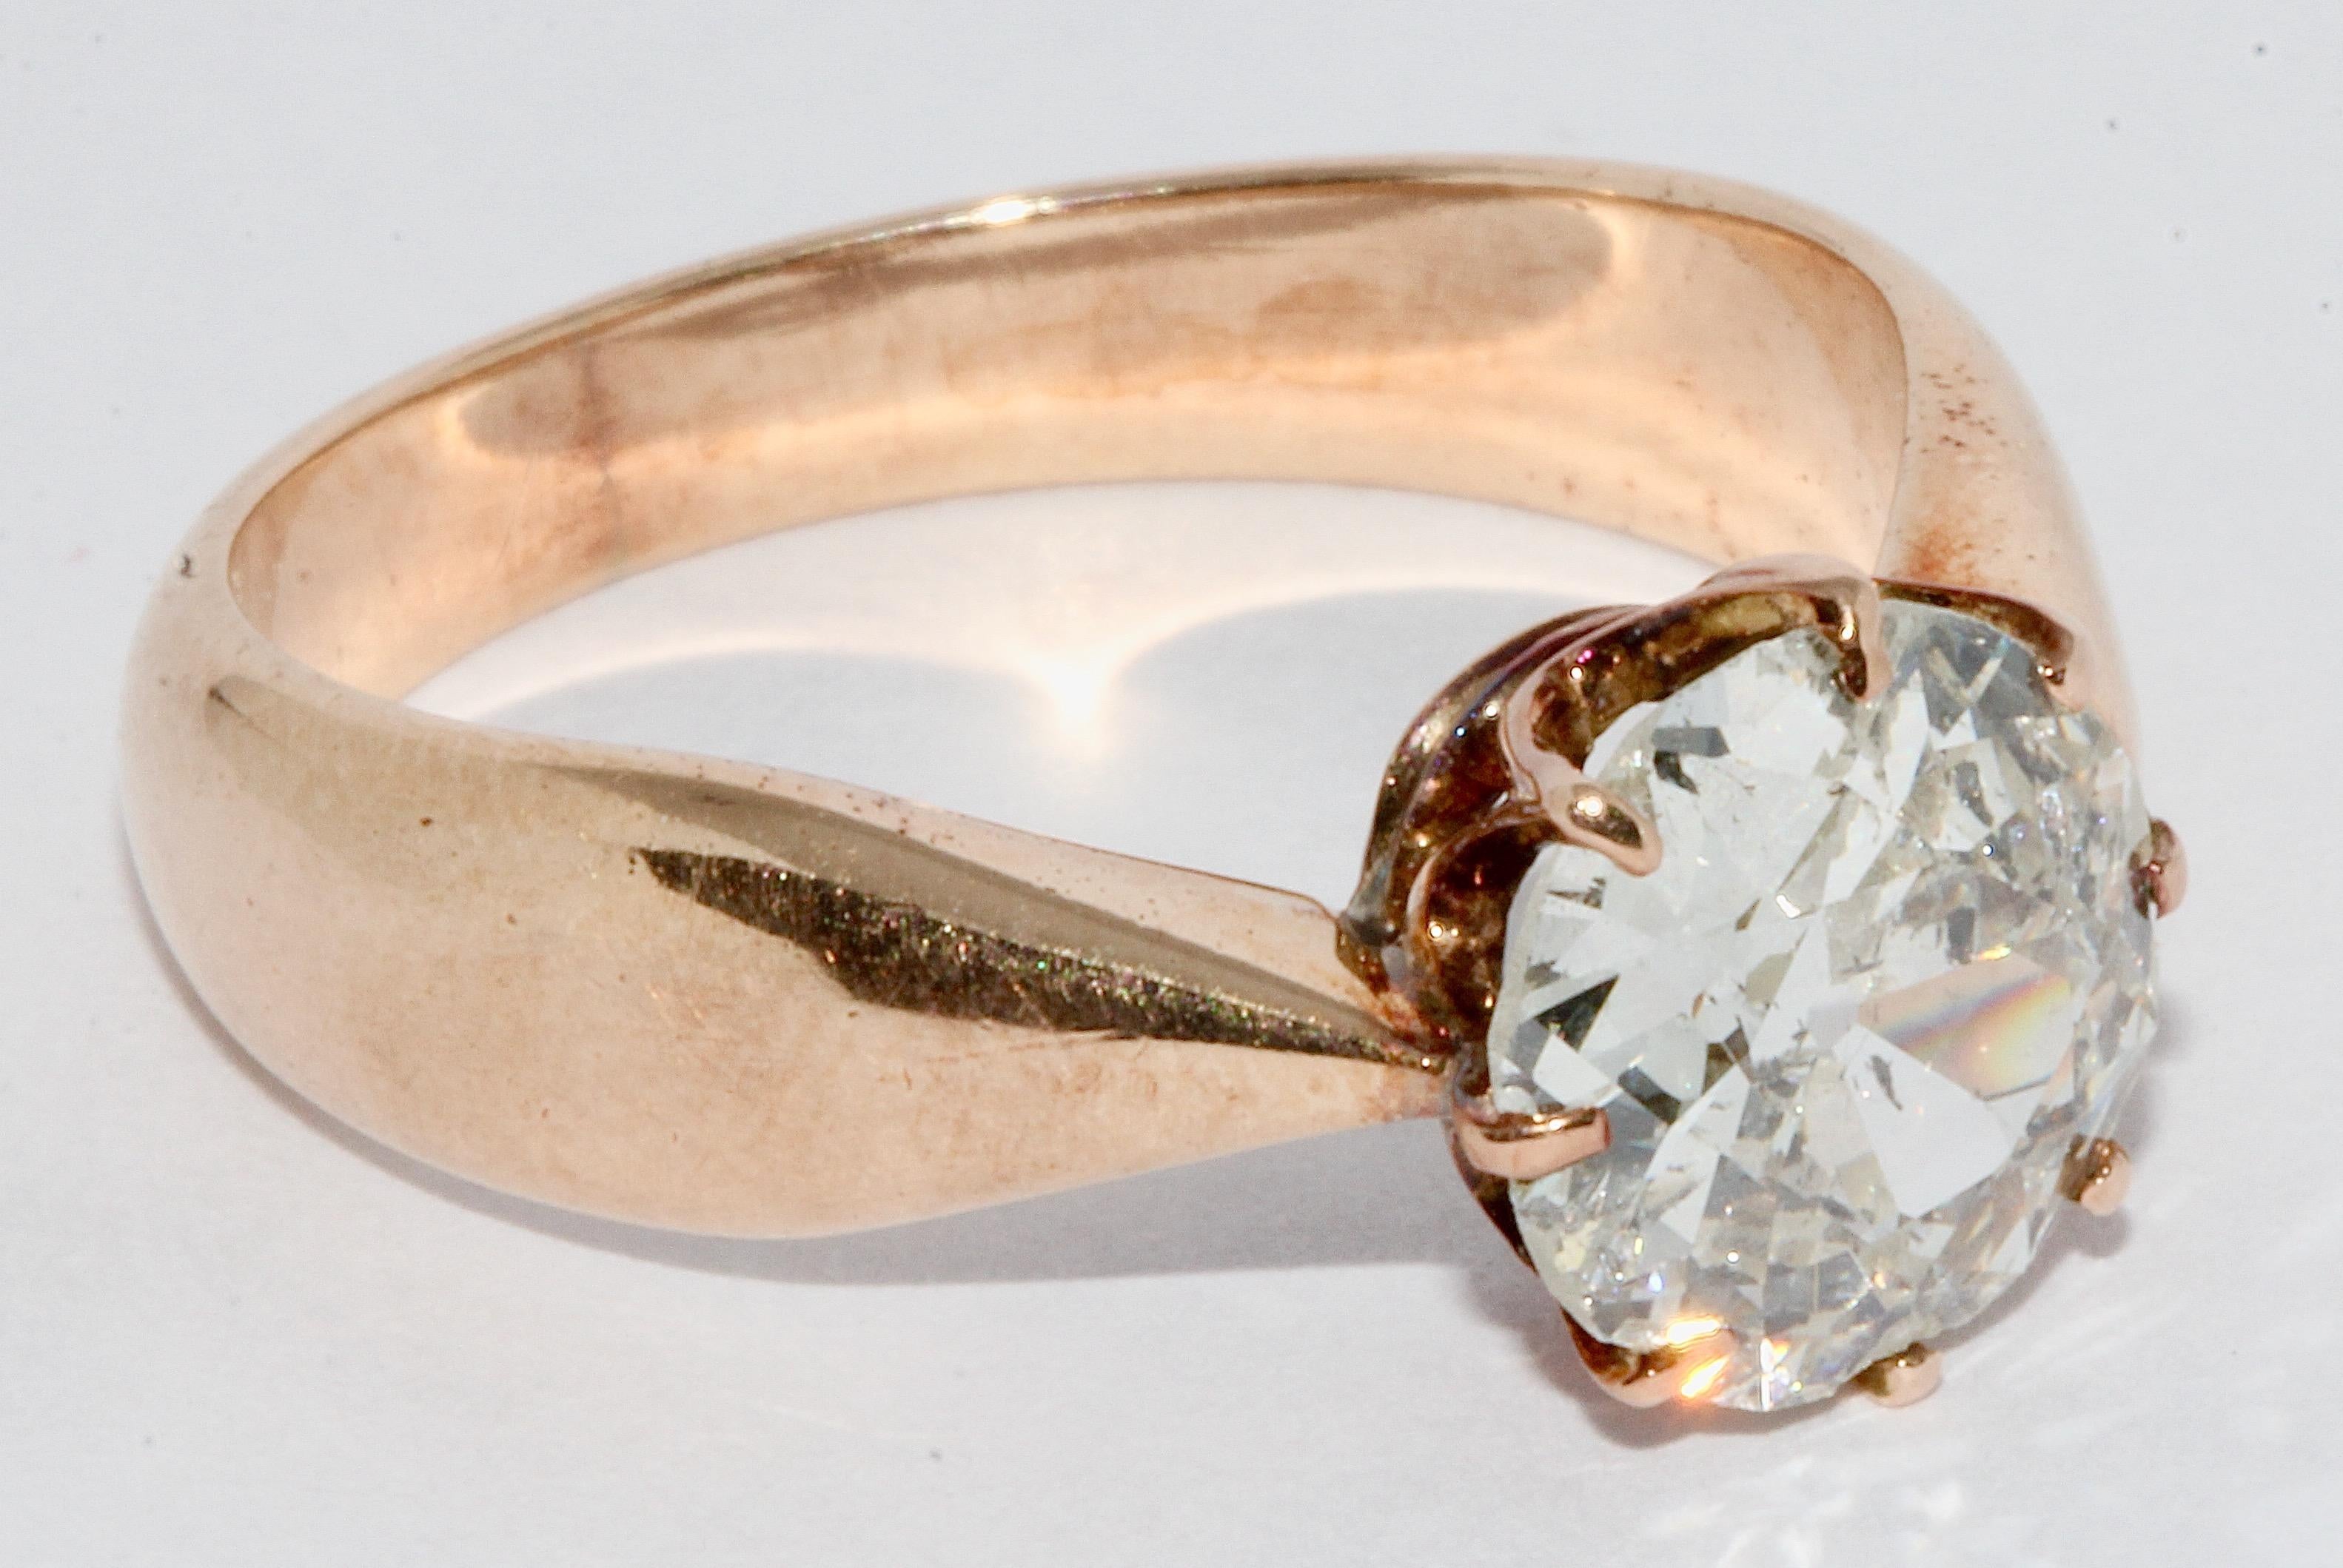 Antique ladies' rose gold ring set with a large, approx. 1.85 carat old cut diamond.

Hallmarked.

Including certificate of authenticity.